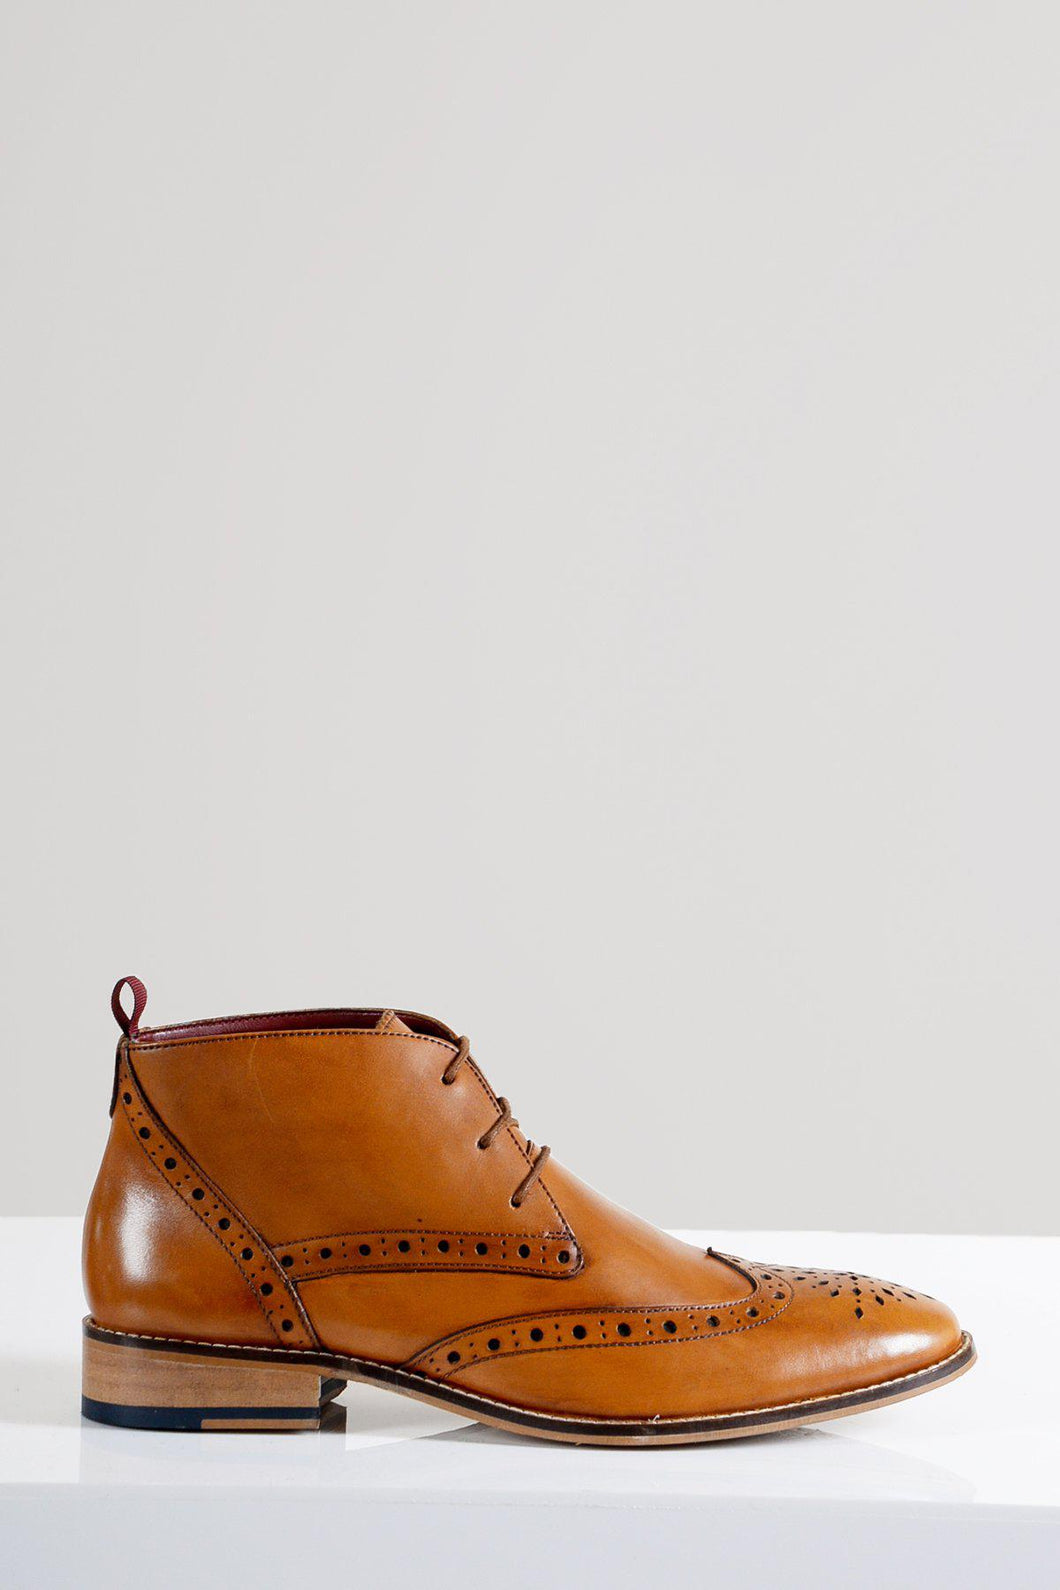 OXFORD Tan Leather Lace Up Brogue Boots by Marc Darcy